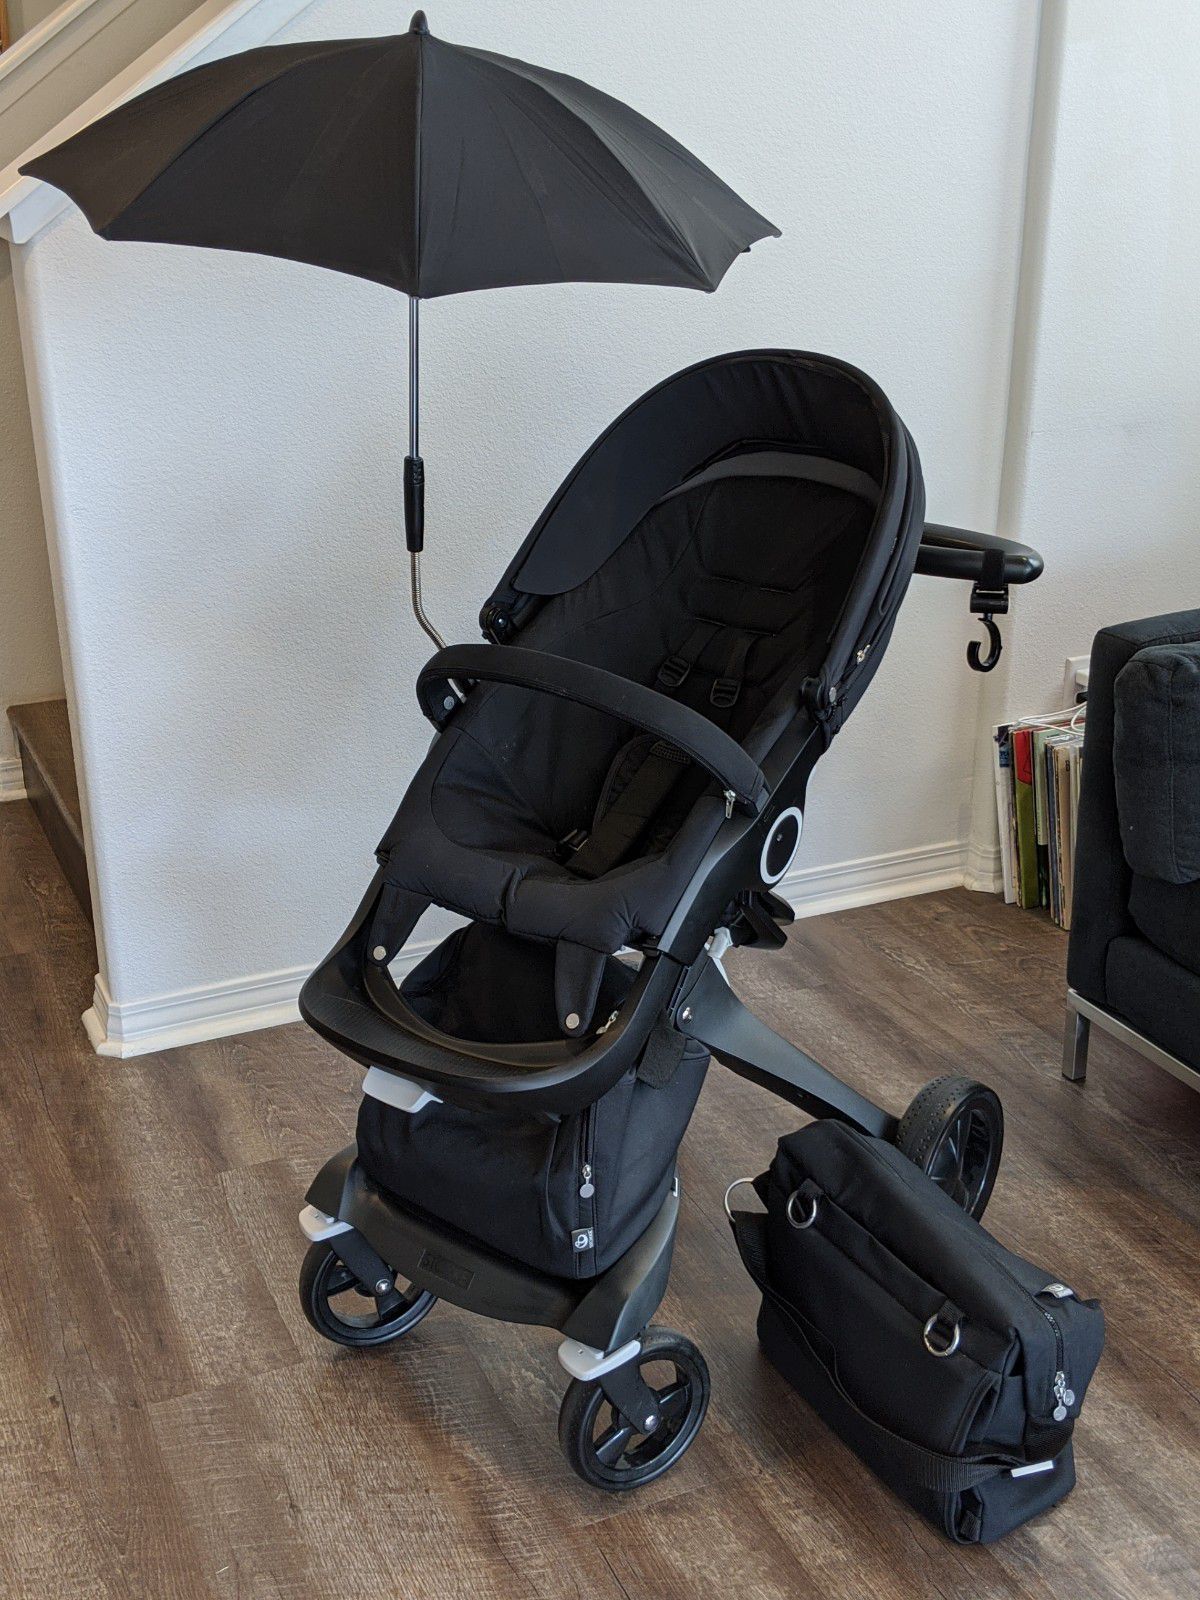 Stokke® Xplory BLACK + accessories, GREAT CONDITION